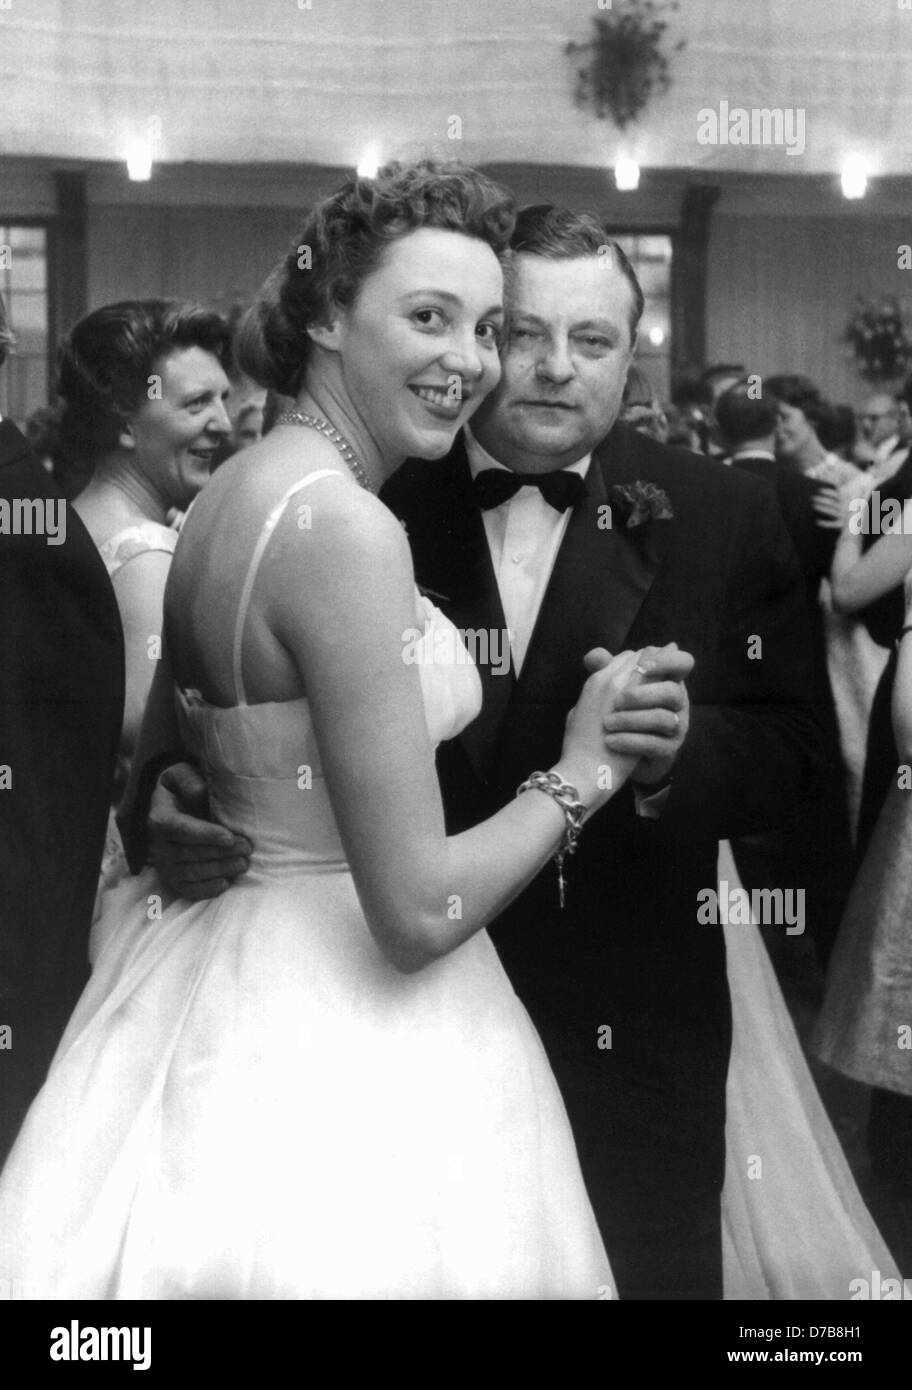 Federal minister of defence Franz Josef Strauss (CSU) dances with his wife Marianne at the Federal Media Ball in Bad Neuenahr on the 9th of November in 1957. Stock Photo